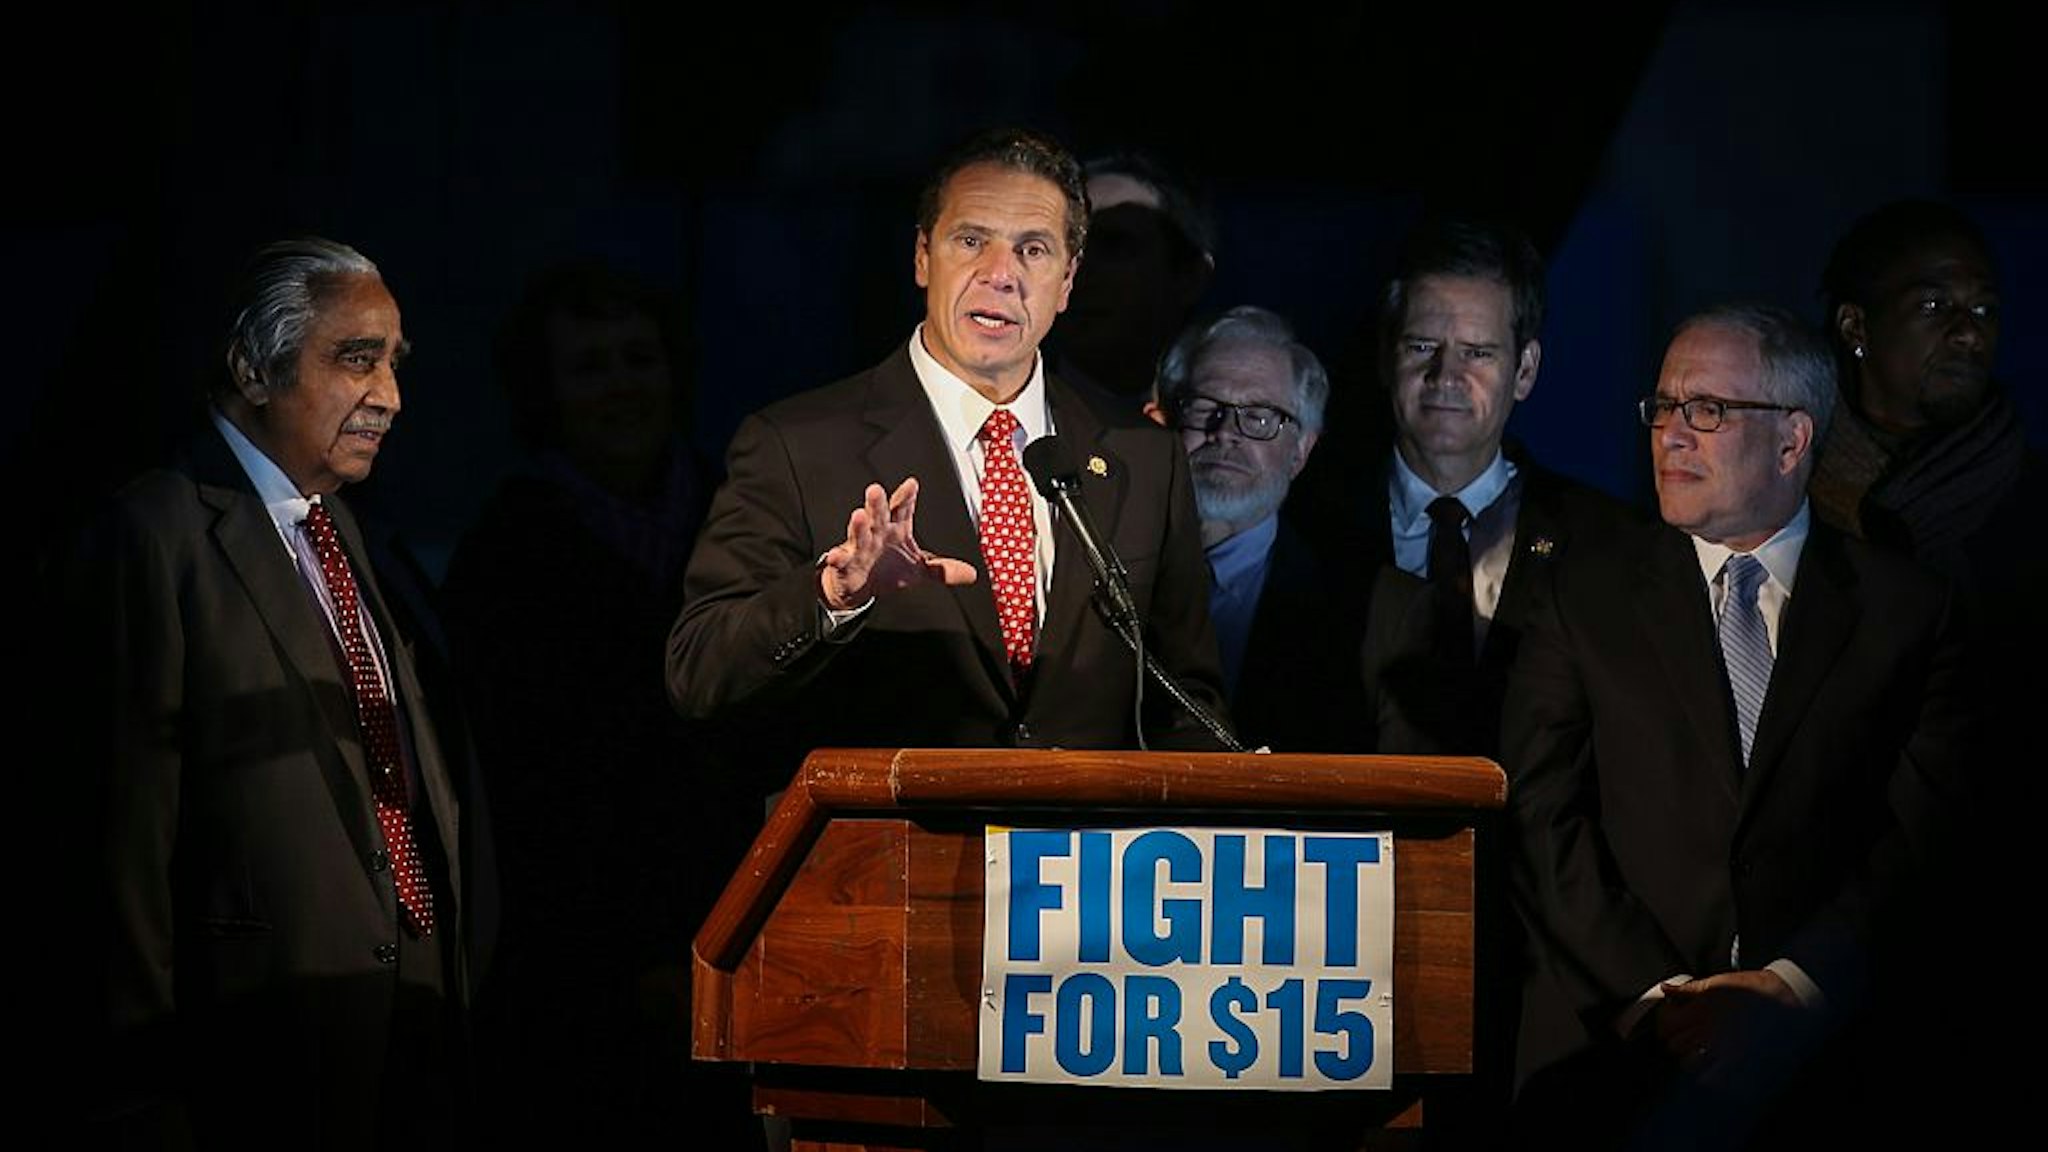 NEW YORK, NY - NOVEMBER 10: New York Governor Andrew Cuomo (C) speaks during as low wage workers and supporters protest for a $15 an hour minimum wage on November 10, 2015 at Foley Square in New York, United States. The protesters are demanding action from state legislators and presidential candidates to raise the minimum wage to $15 USD an hour. (Photo by Cem Ozdel/Anadolu Agency/Getty Images)